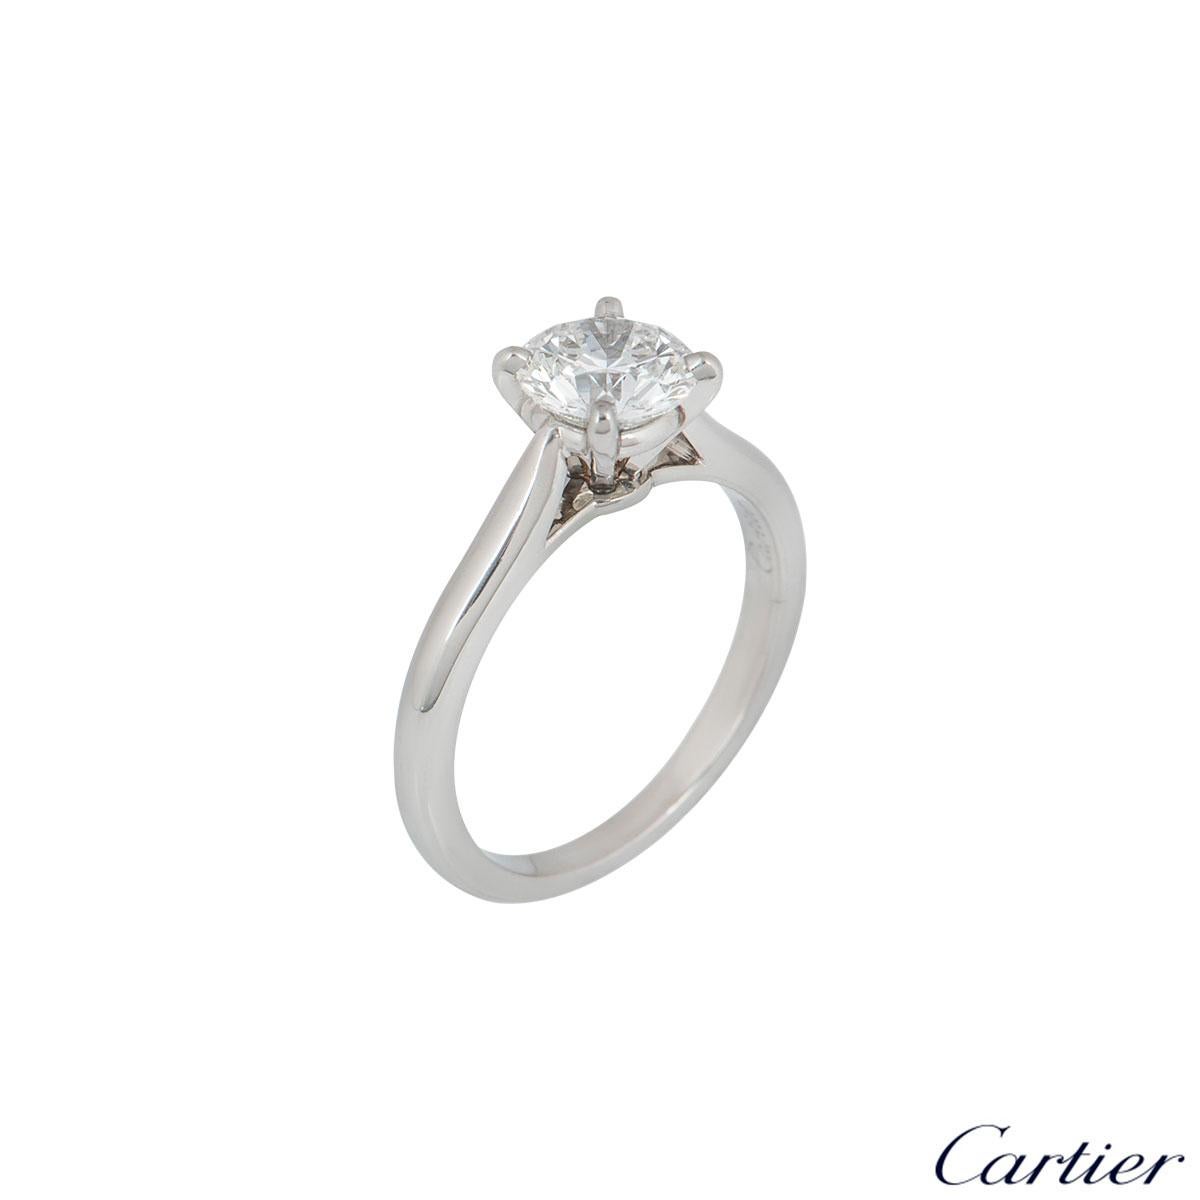 A stunning platinum diamond engagement ring by Cartier from the 1895 solitaire collection. The ring comprises of a round brilliant cut diamond in a four claw setting with a weight of 0.90ct, H colour and VS1 clarity. The diamond scores an excellent